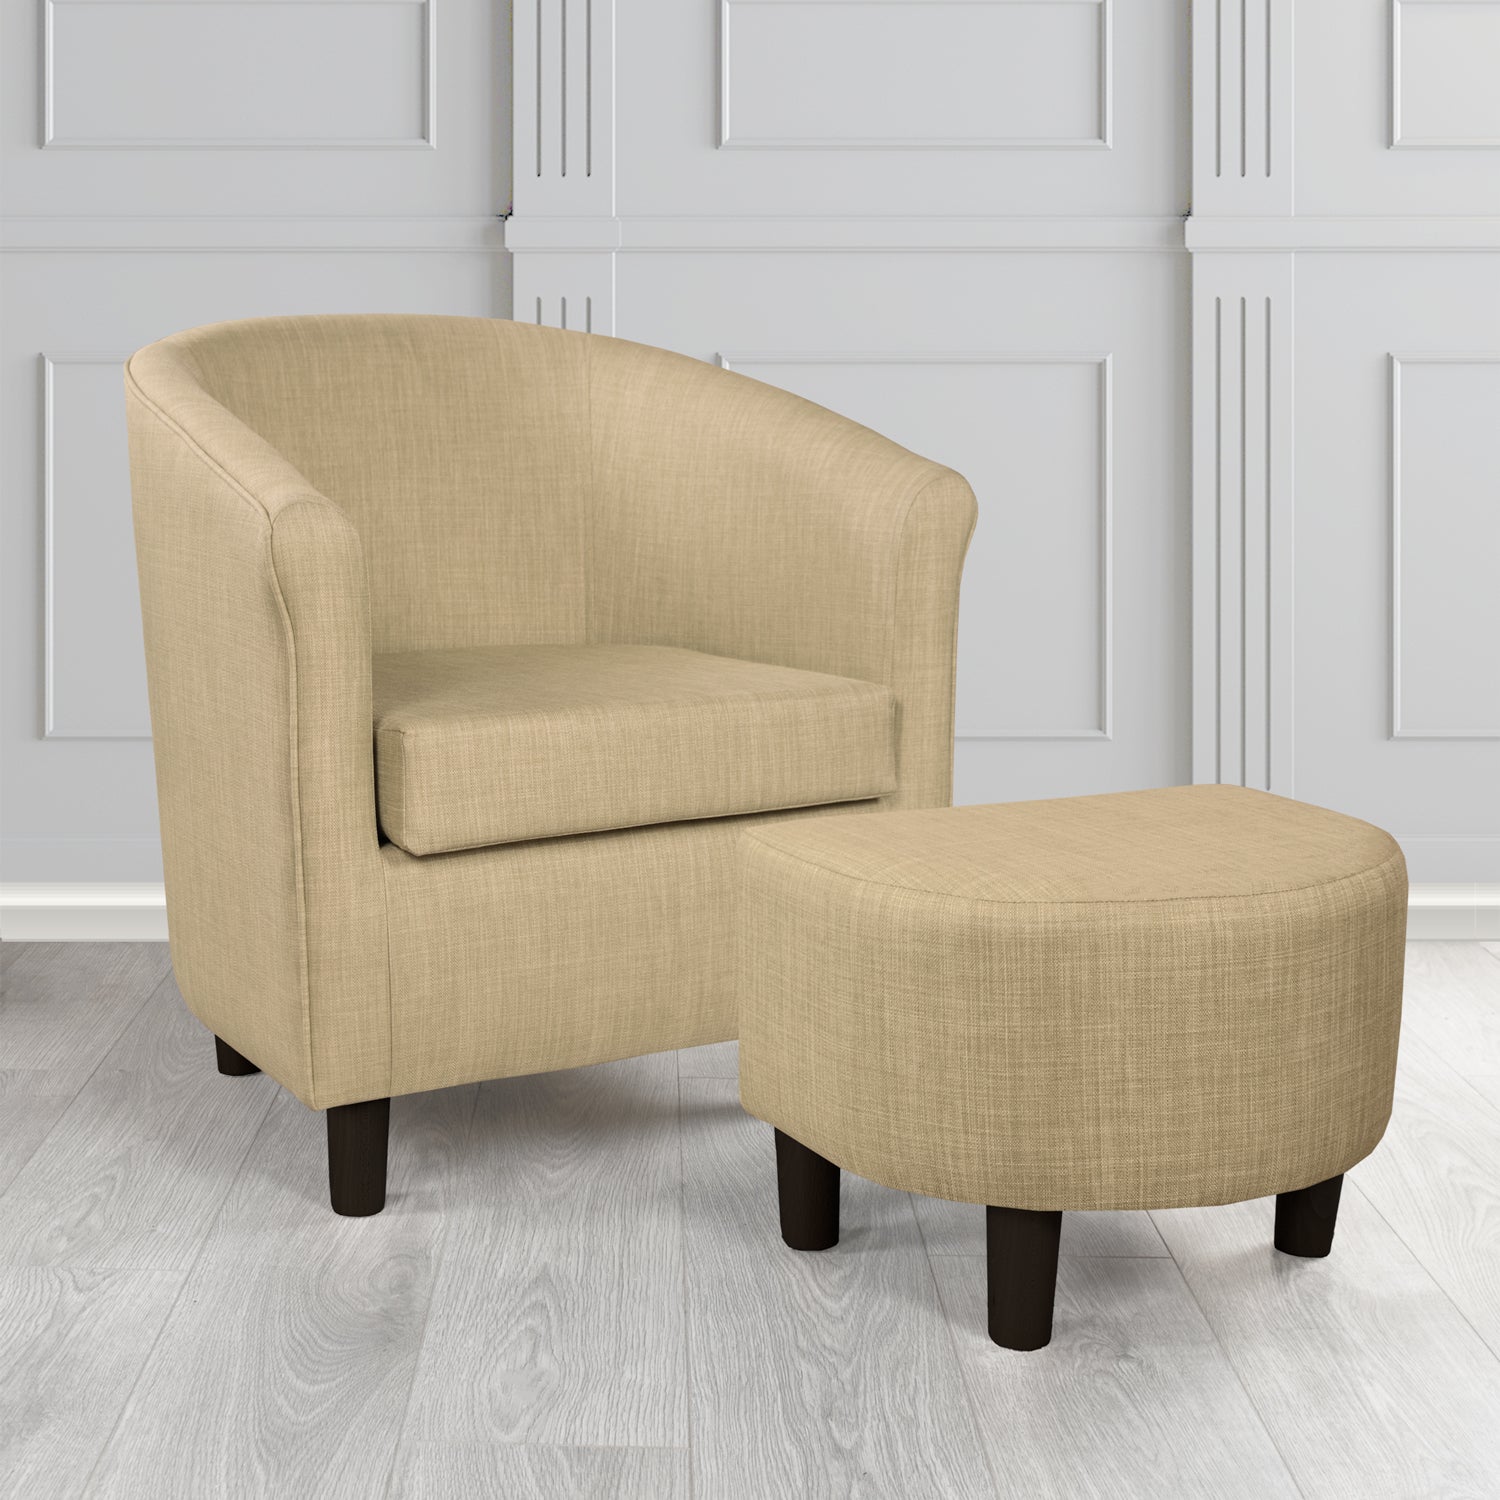 Tuscany Charles Mink Linen Plain Fabric Tub Chair with Dee Footstool Set - The Tub Chair Shop